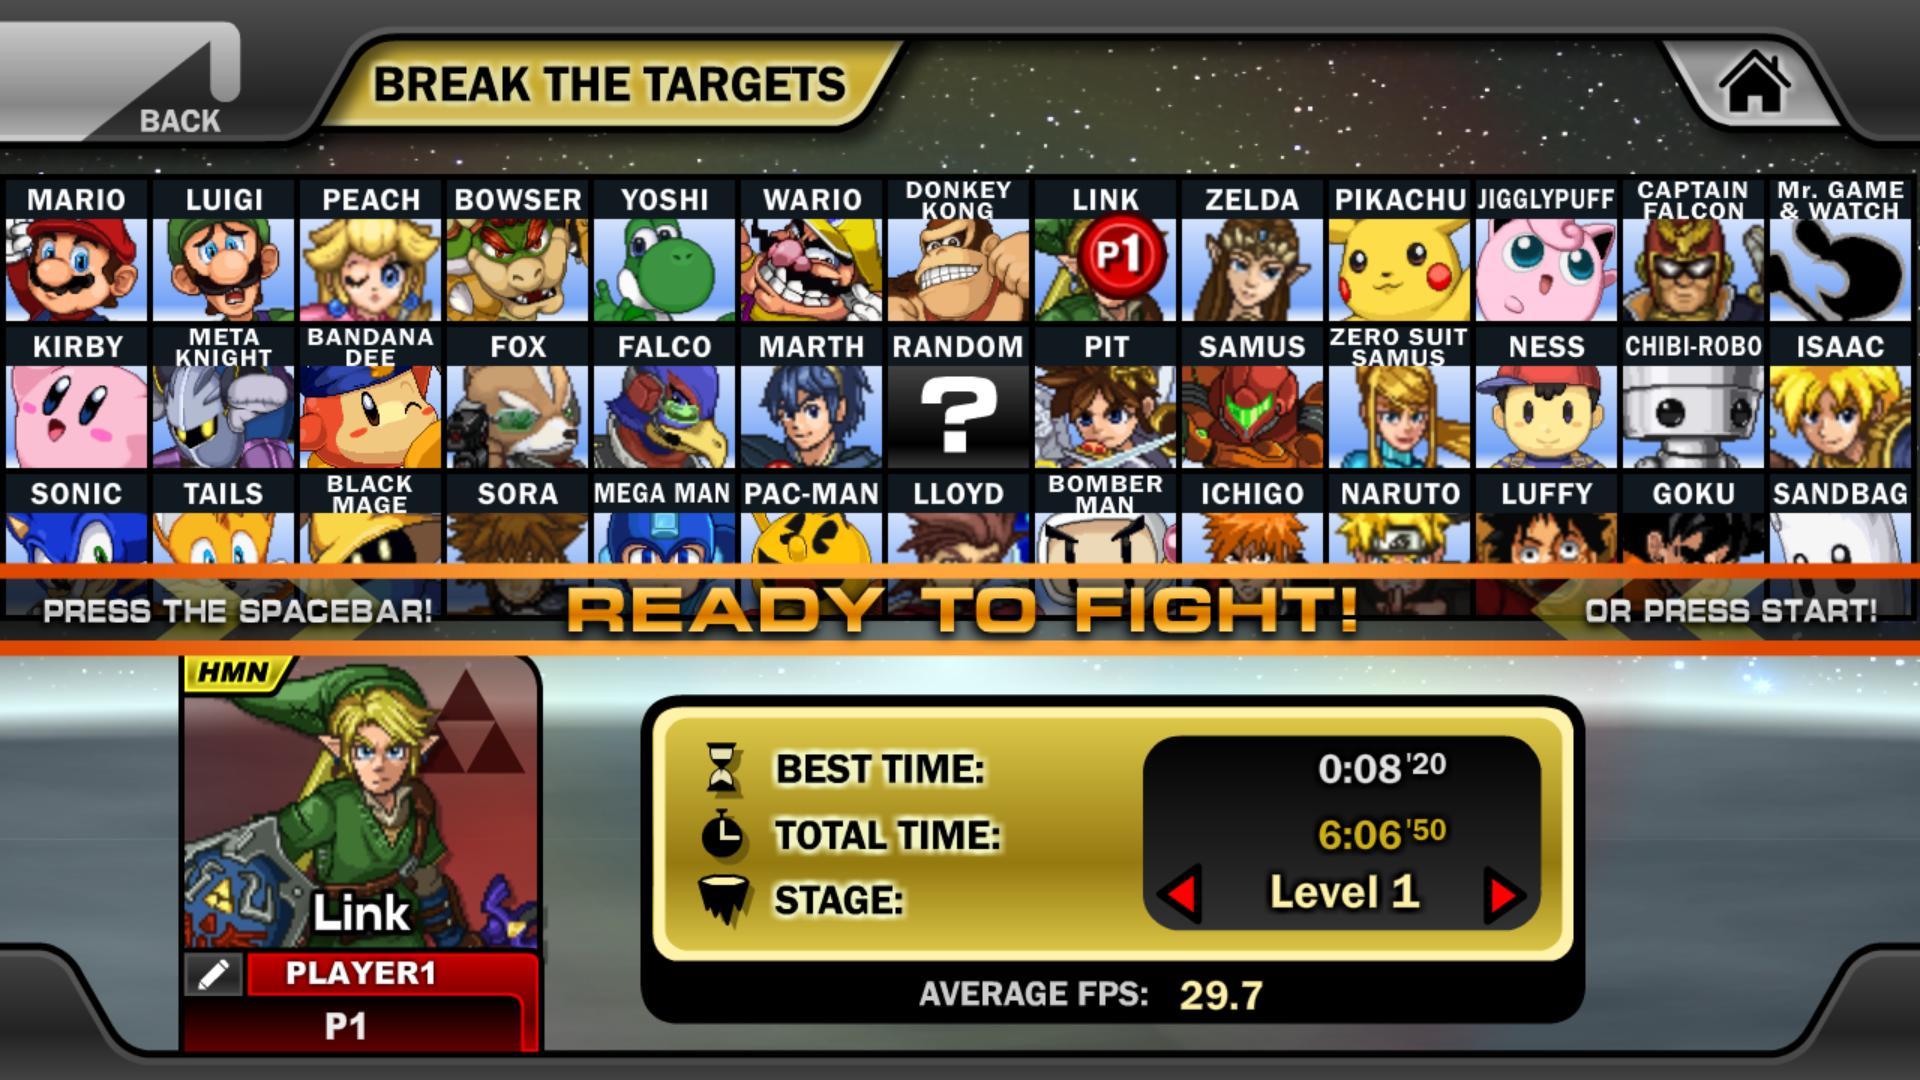 How to enable Flash – Super Smash Flash